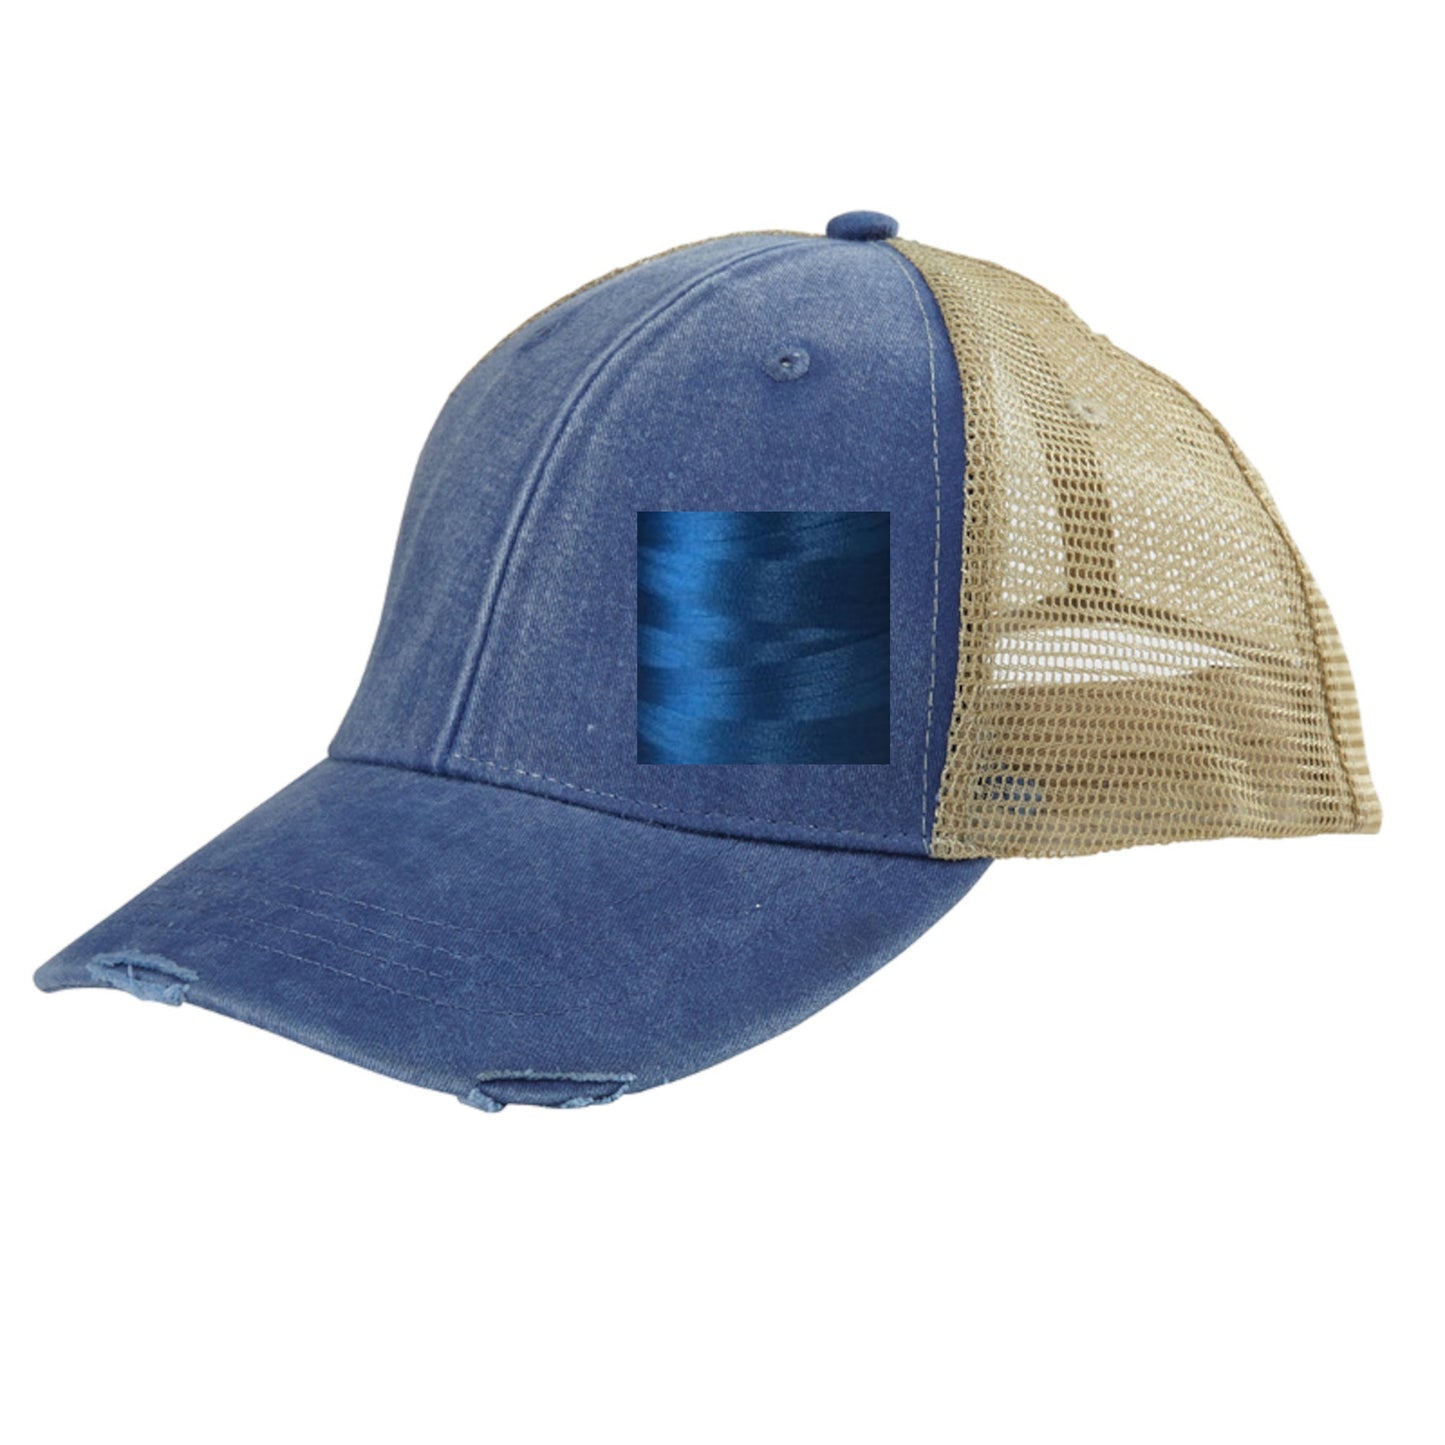 Kentucky Hat | Distressed Snapback Trucker | state cap | many color choices